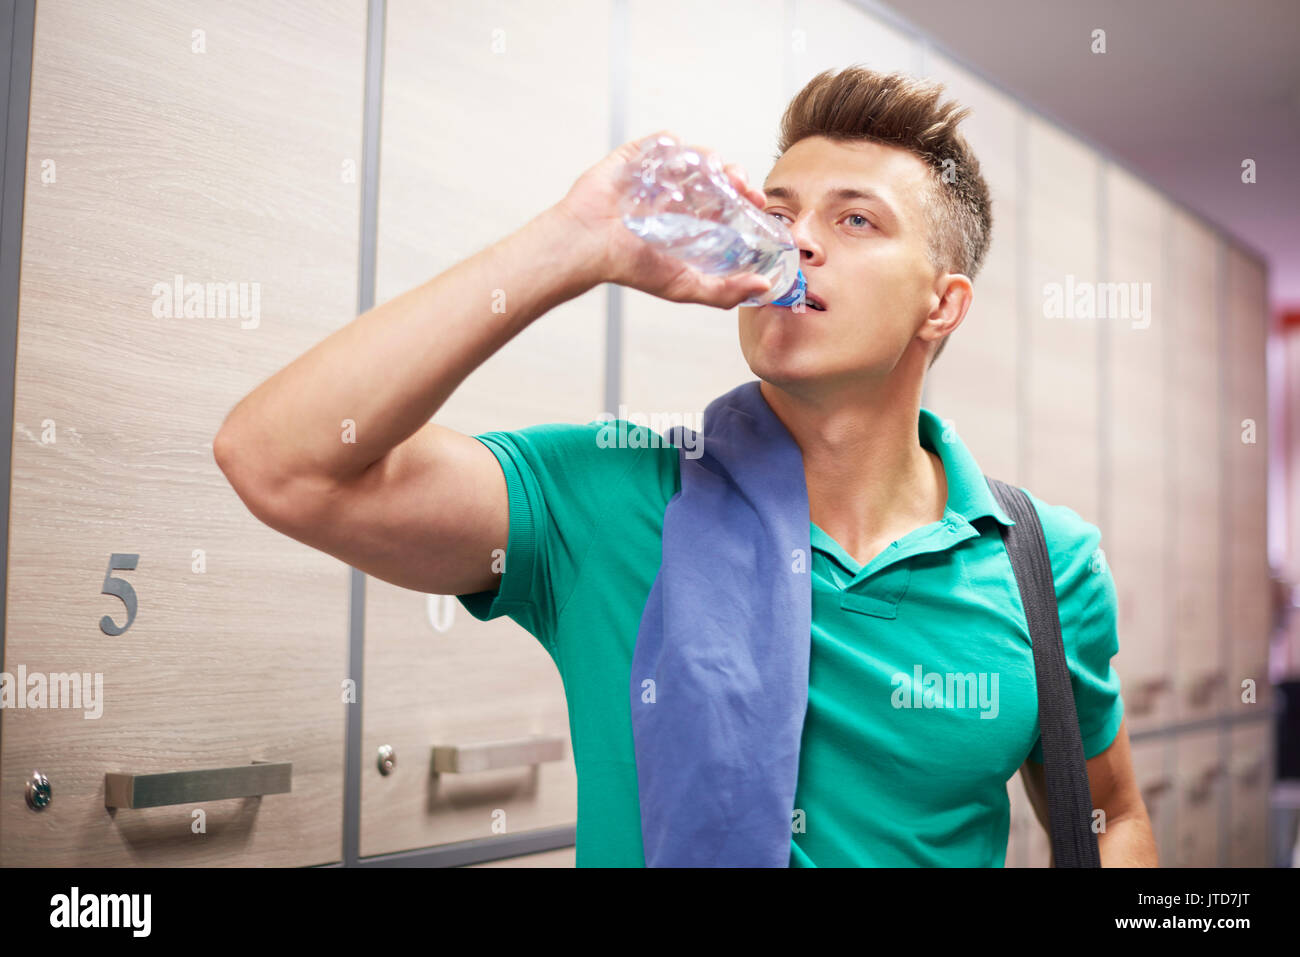 Thirsty man after tiring traning at the gym Stock Photo